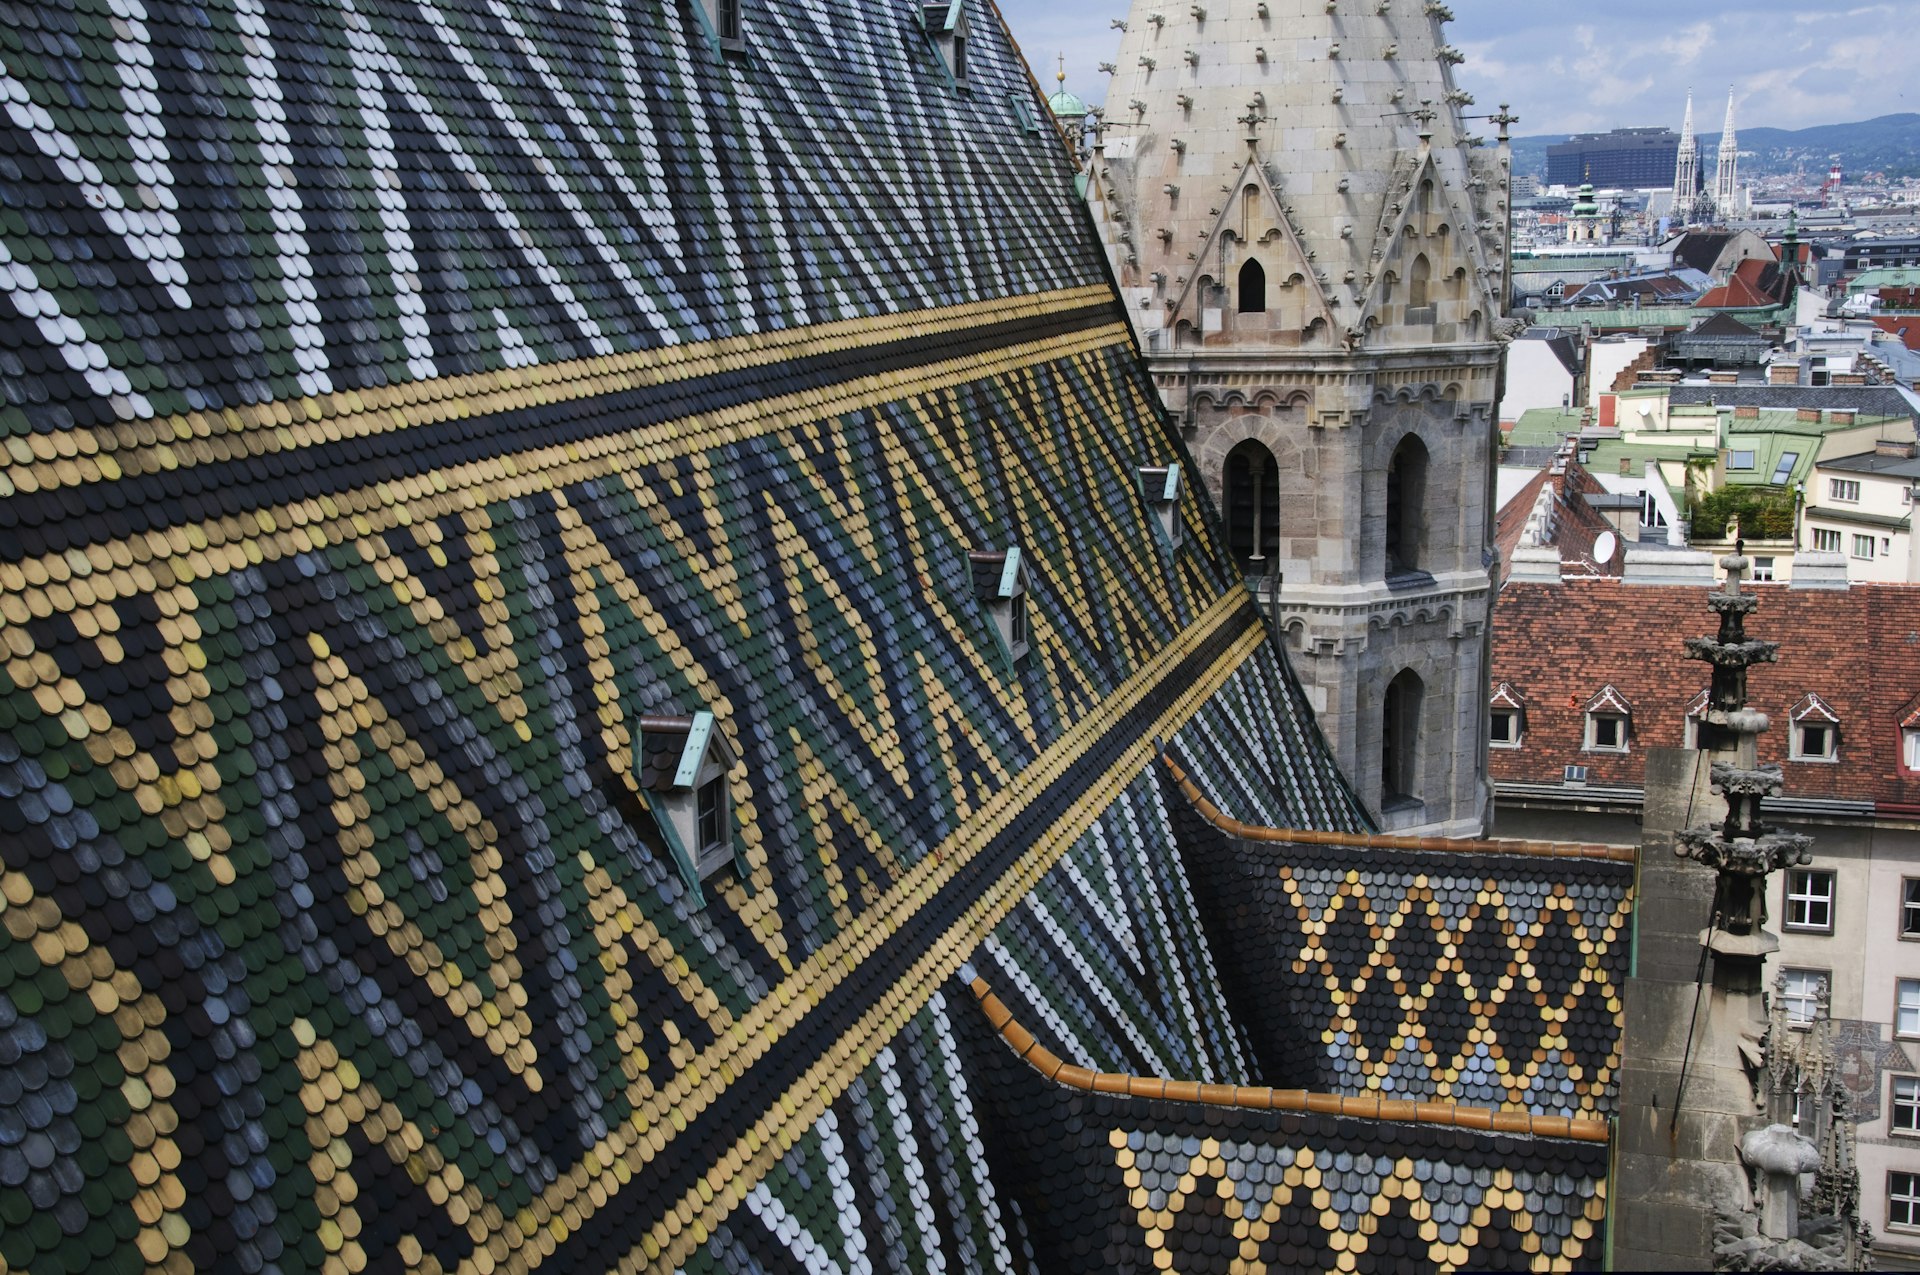 Mosaic tiles on the roof of Stephansdom, Vienna, Austria